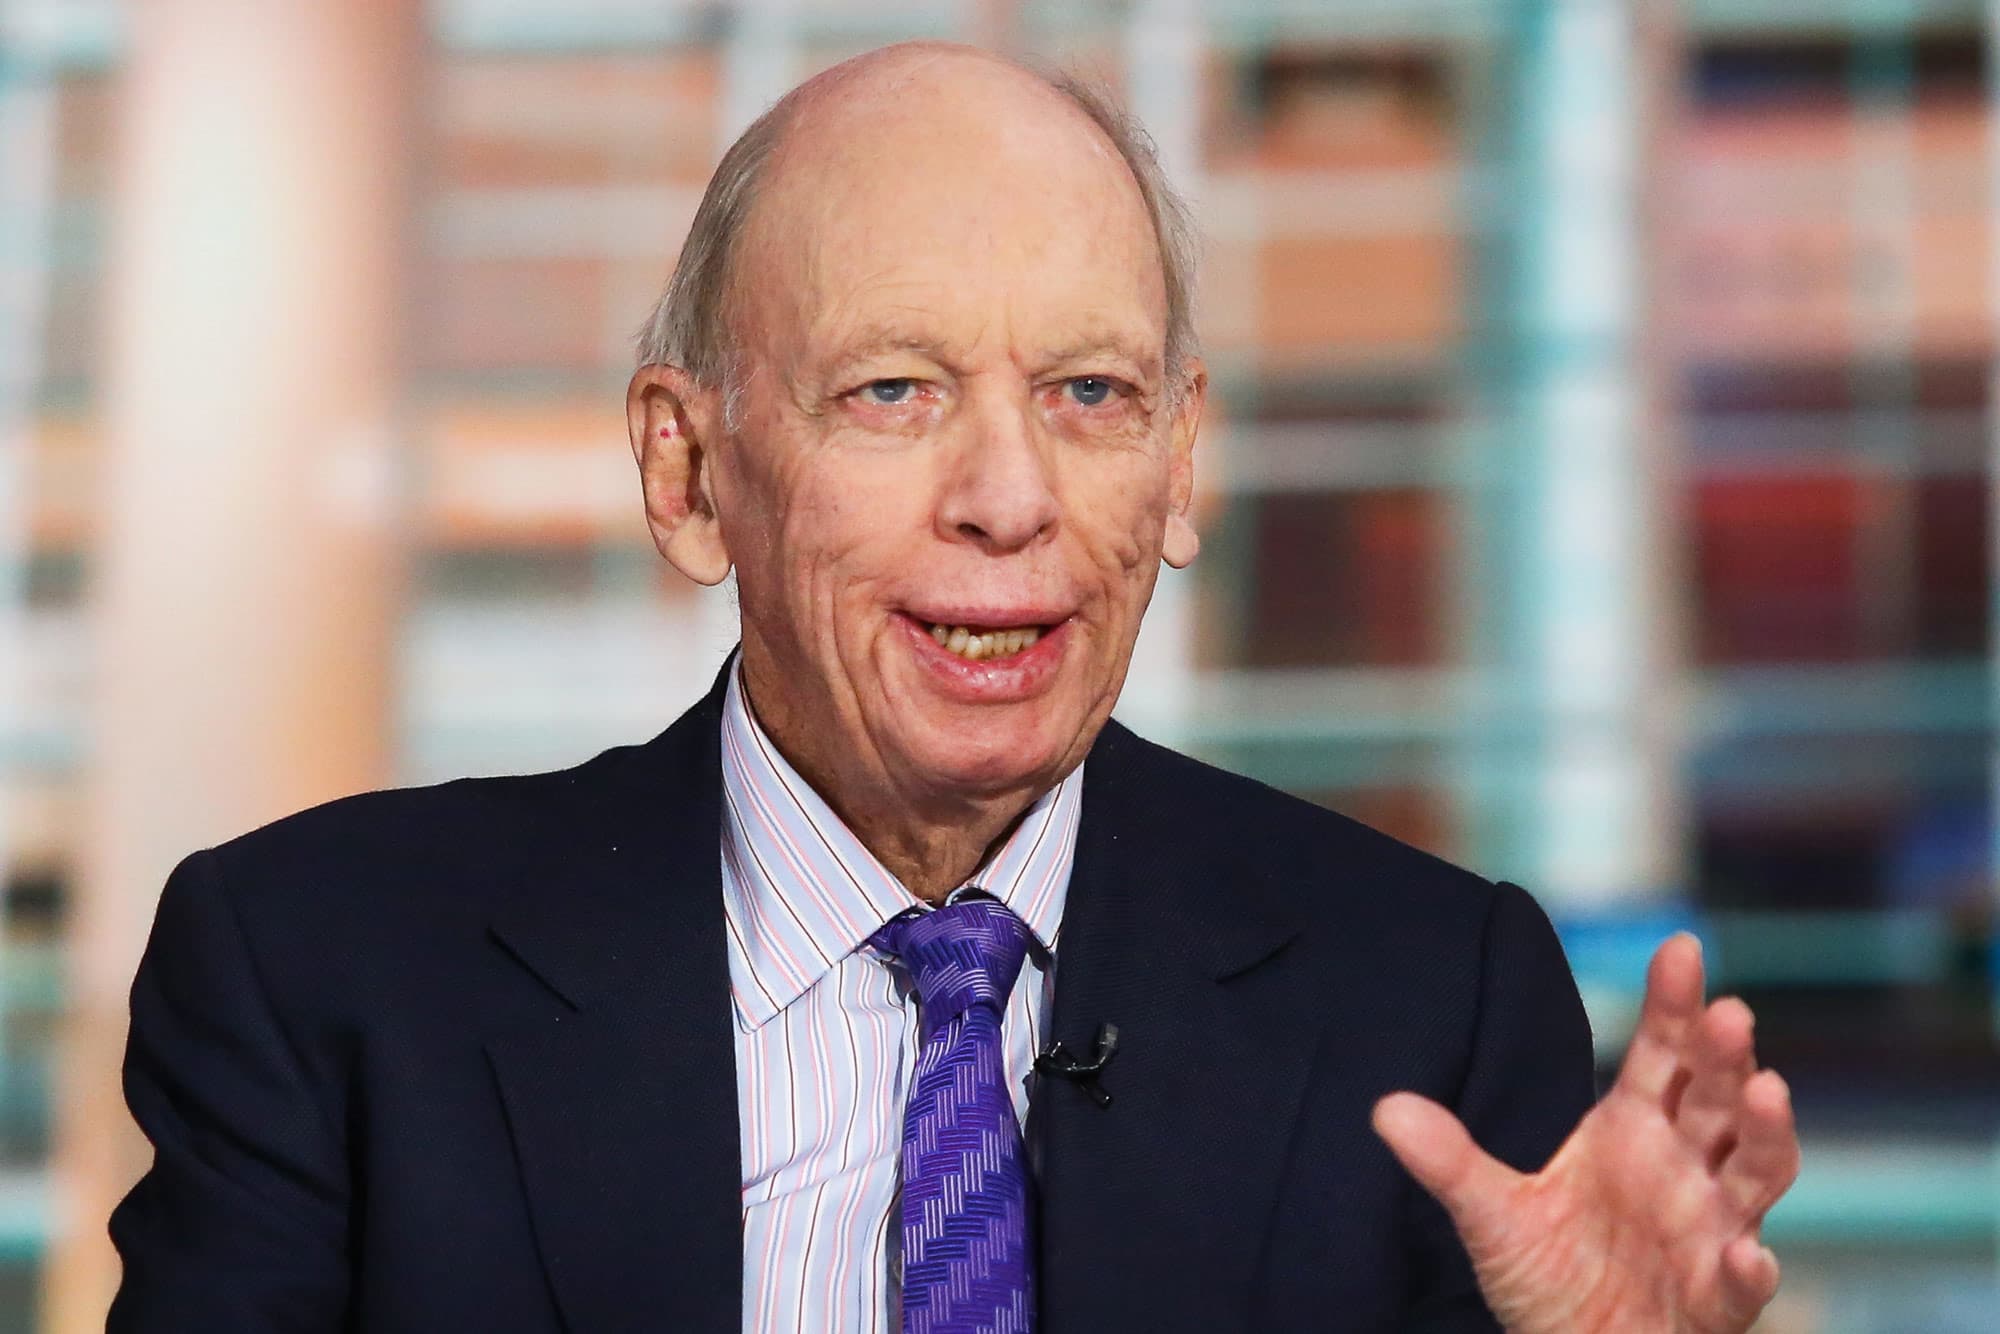 Byron Wien worries about Fed-induced correction however sees market rebound